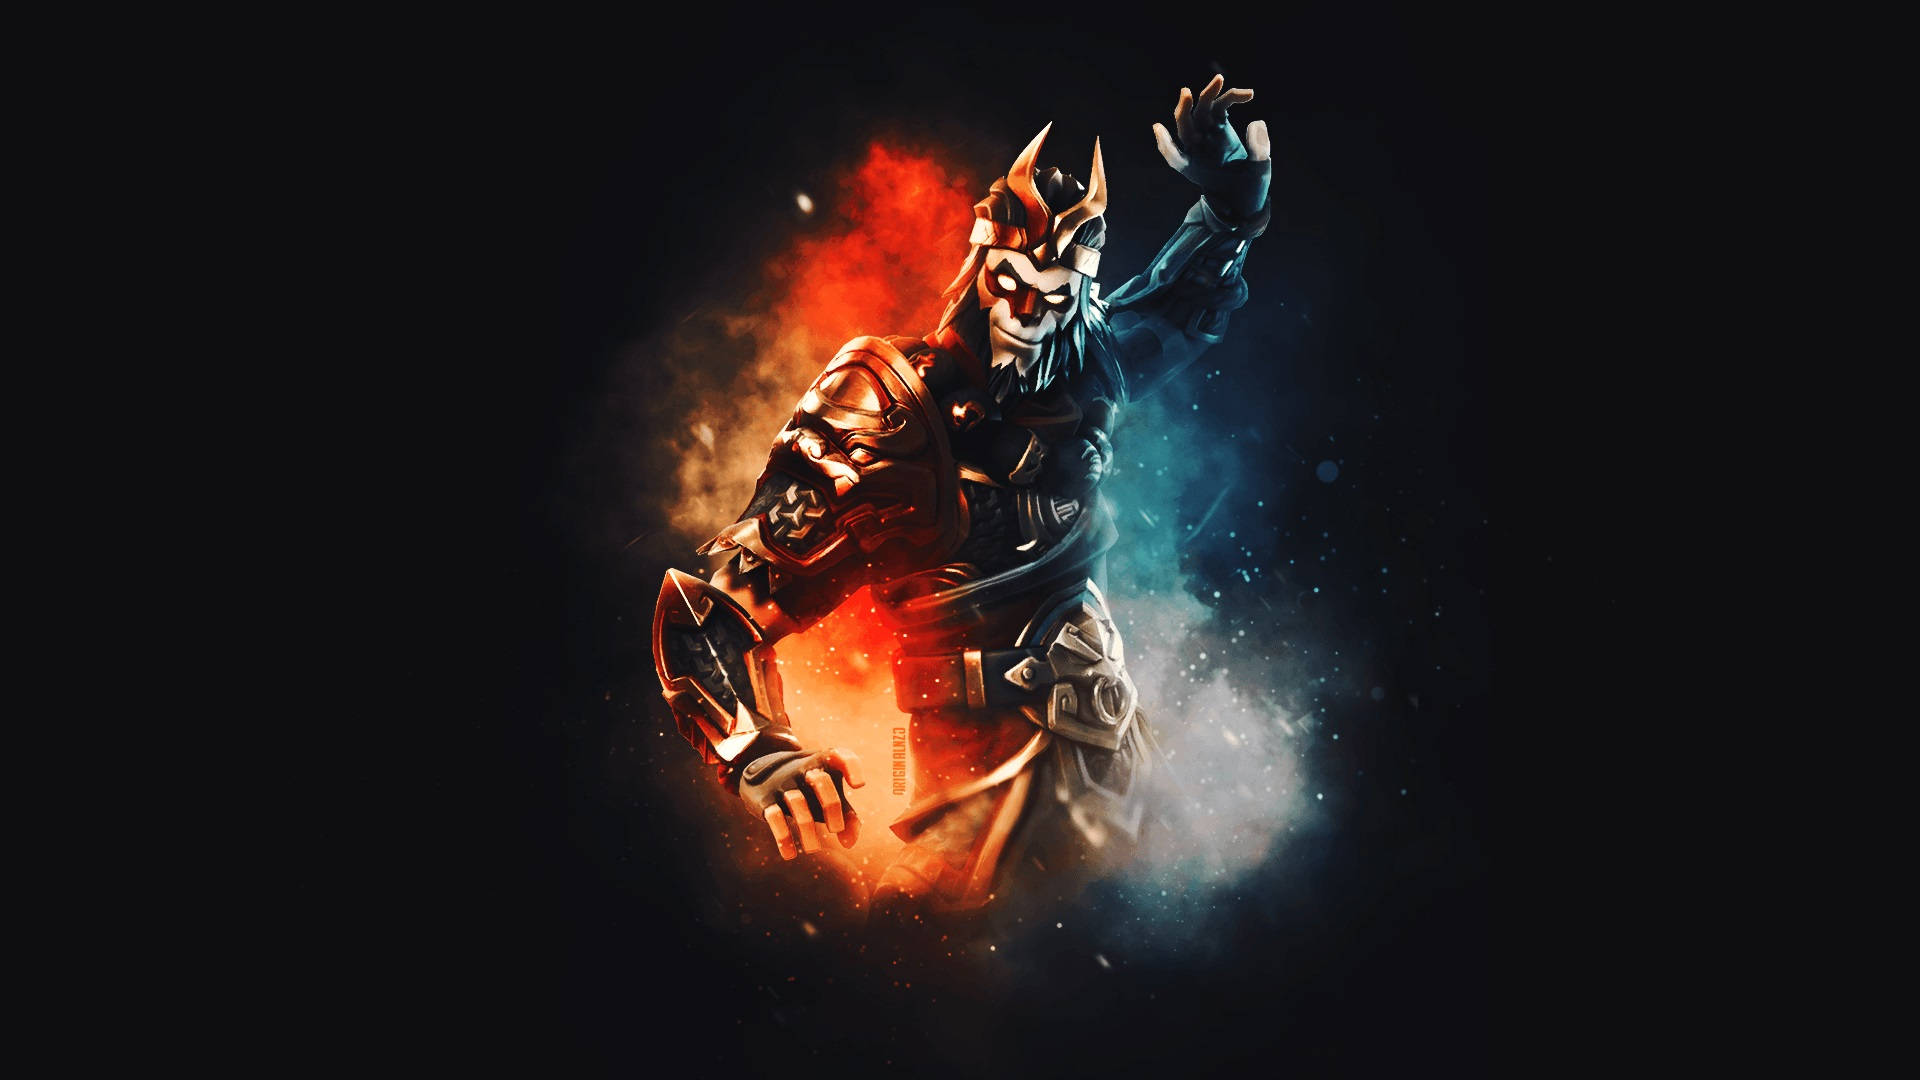 Cool Fortnite Skin Wukong Explosion Effect Background